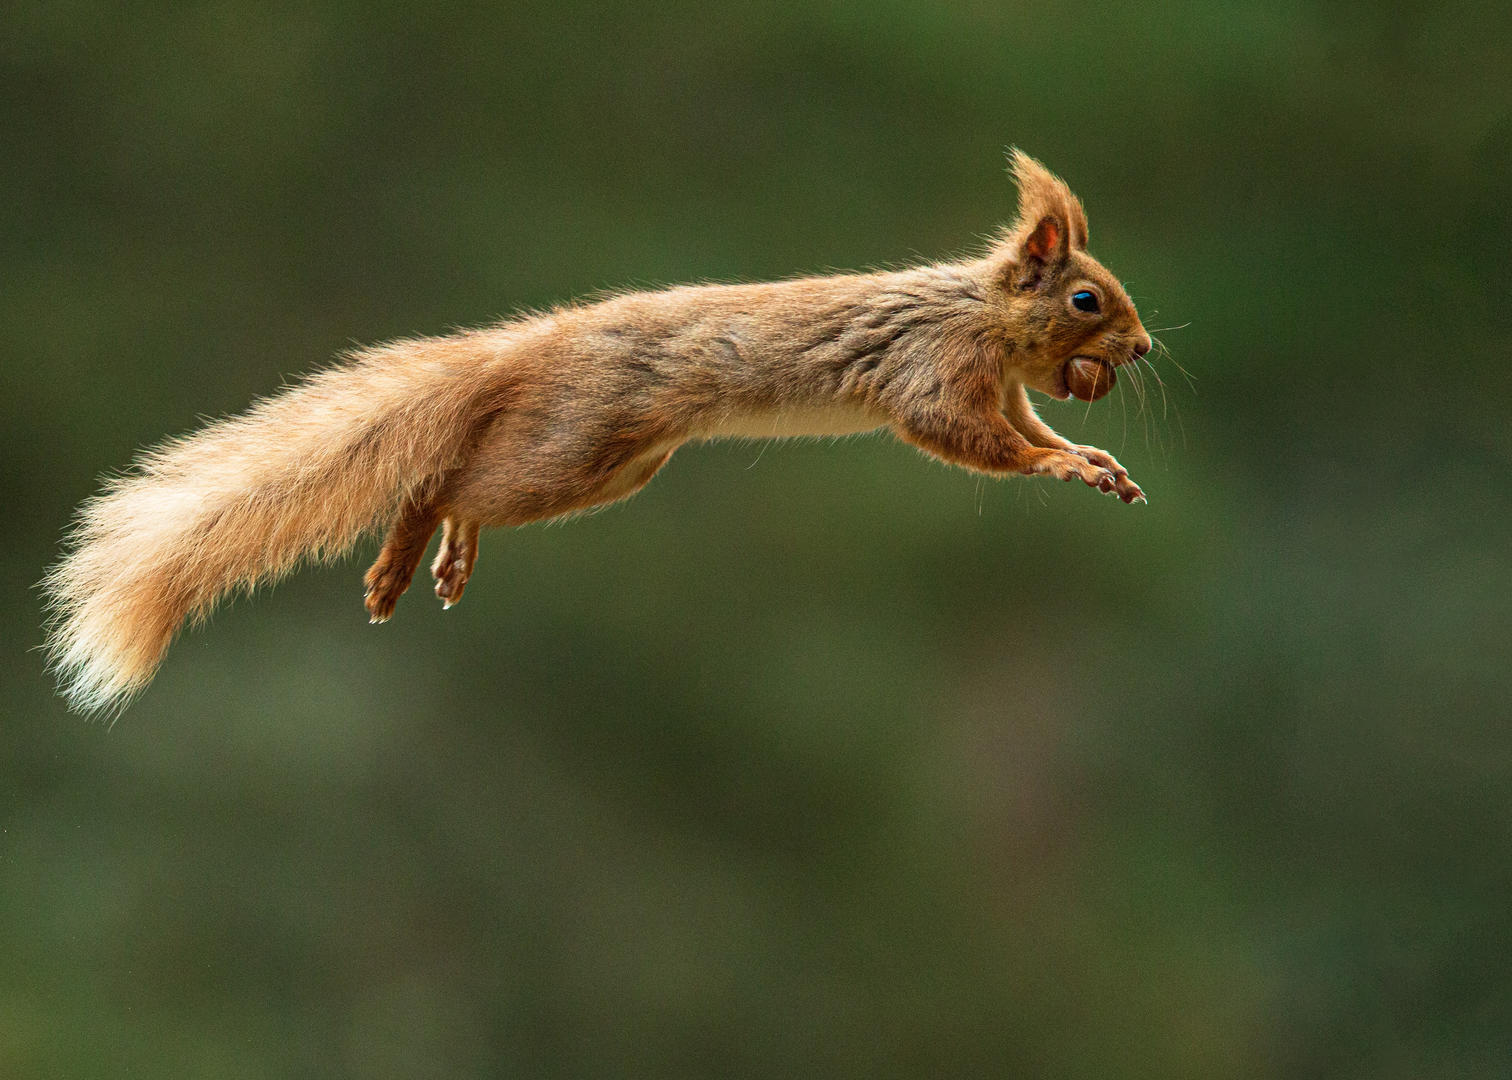 Animals Jumping - Animals photo contest | Photocrowd photo competitions